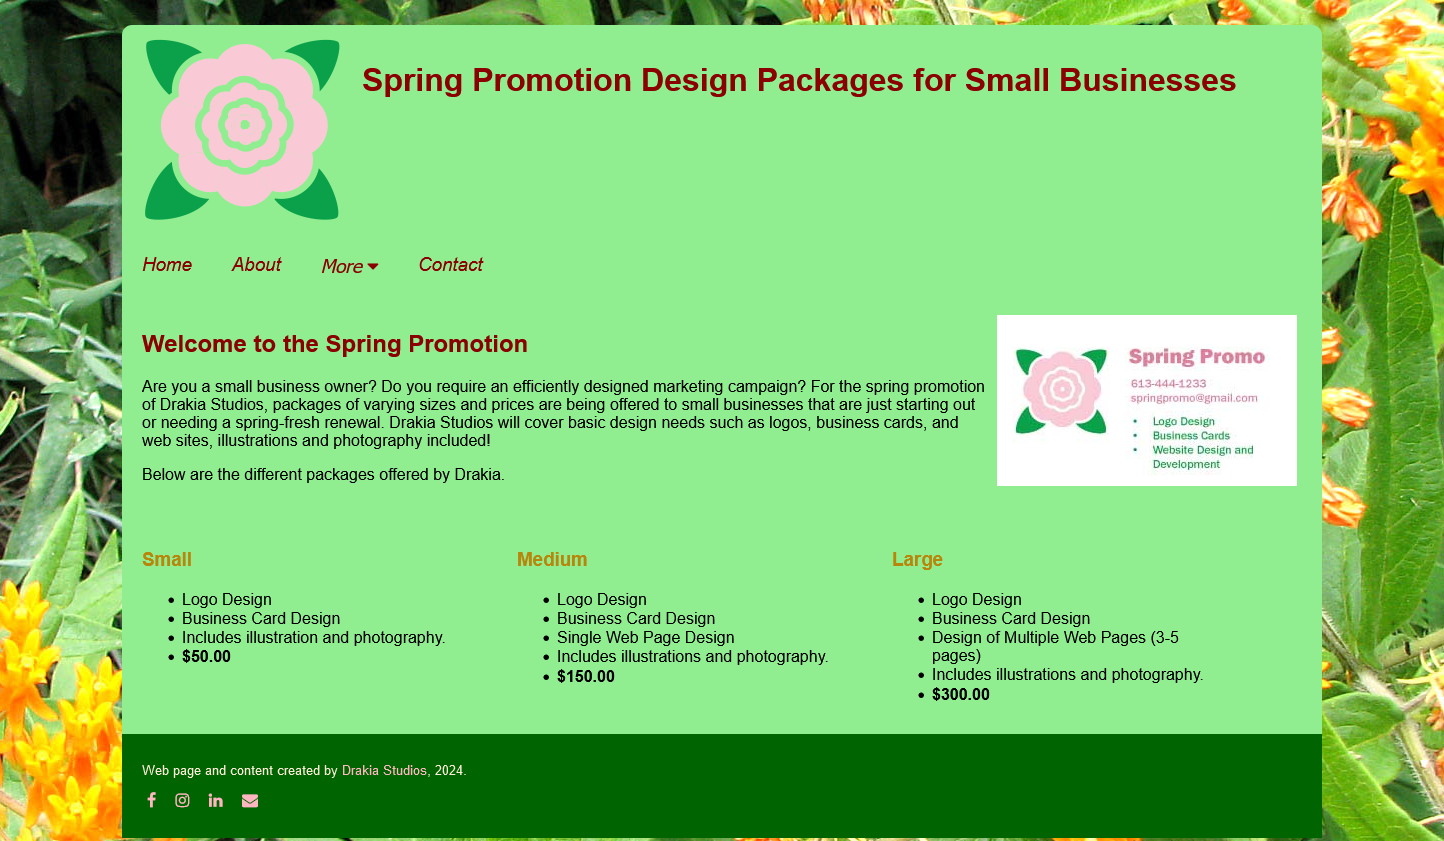 The spring promotion page for small businesses